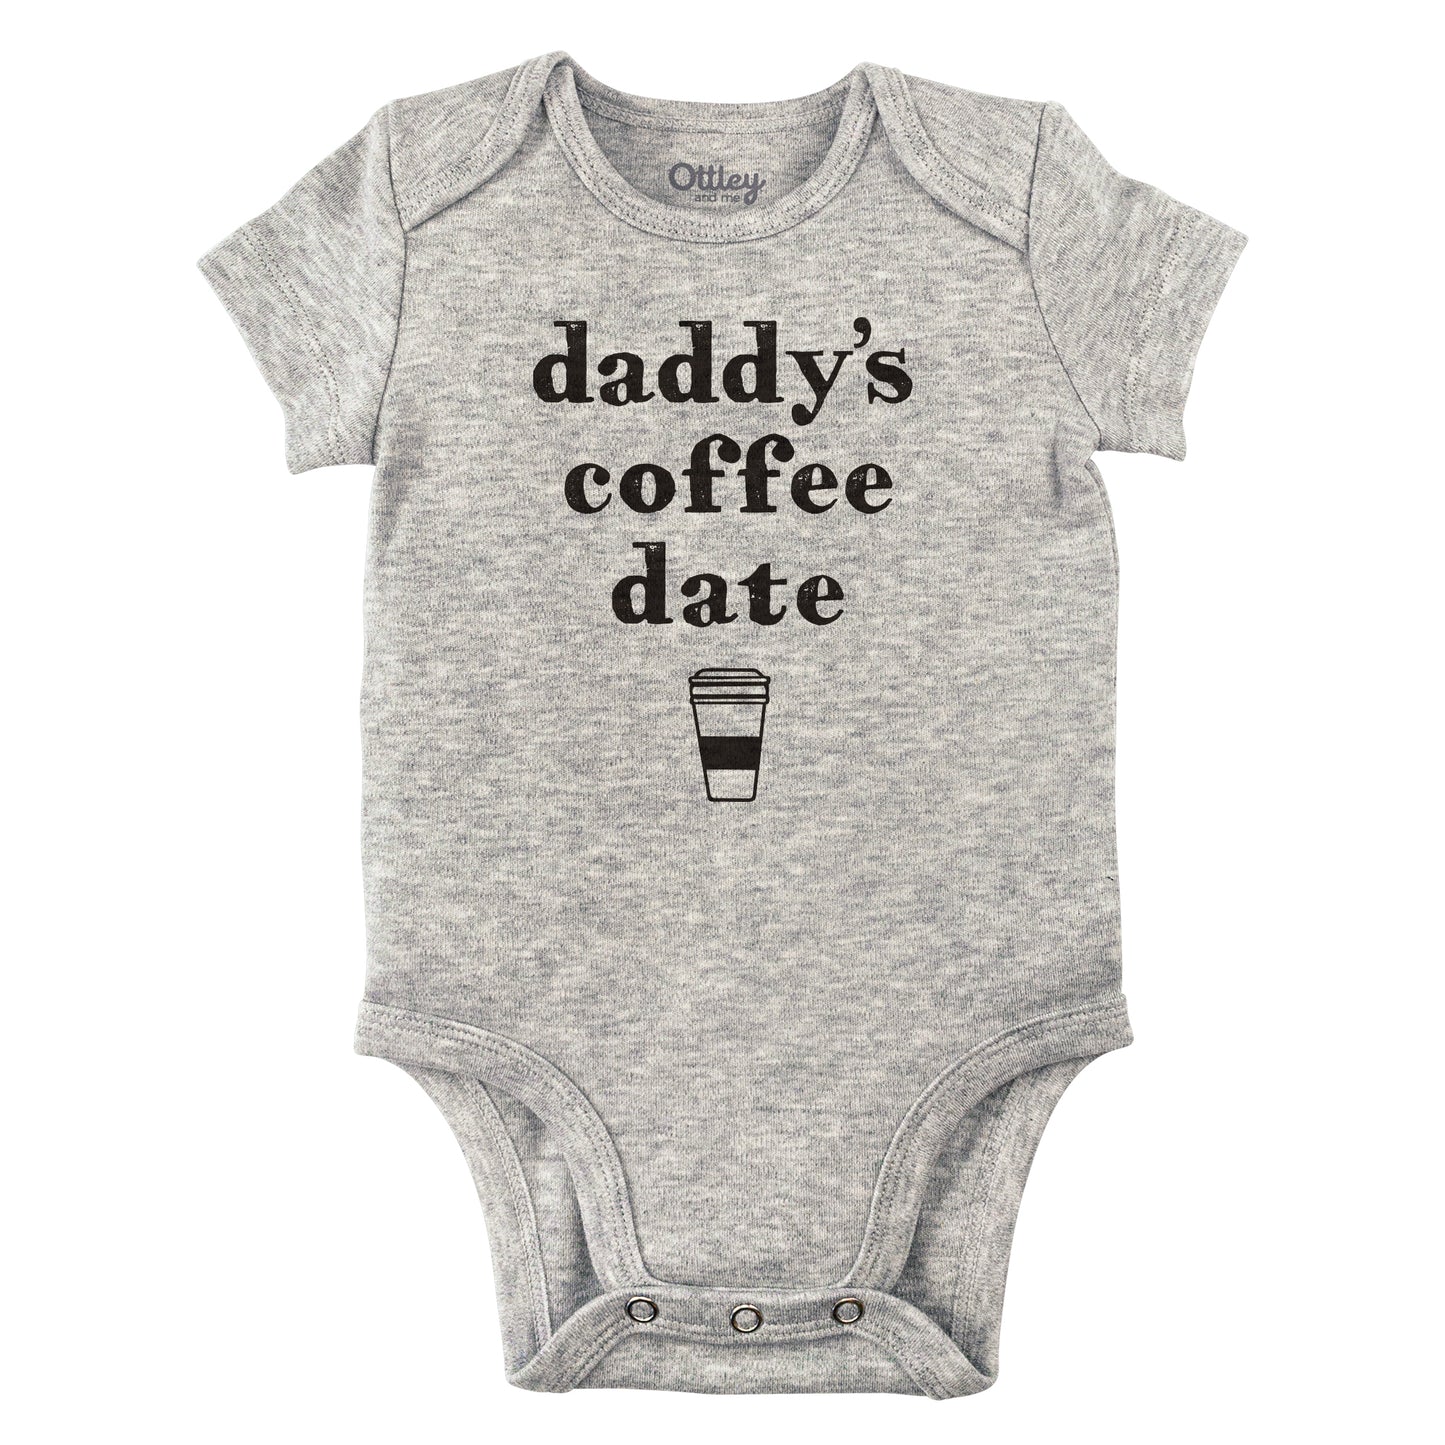 daddy's coffee date